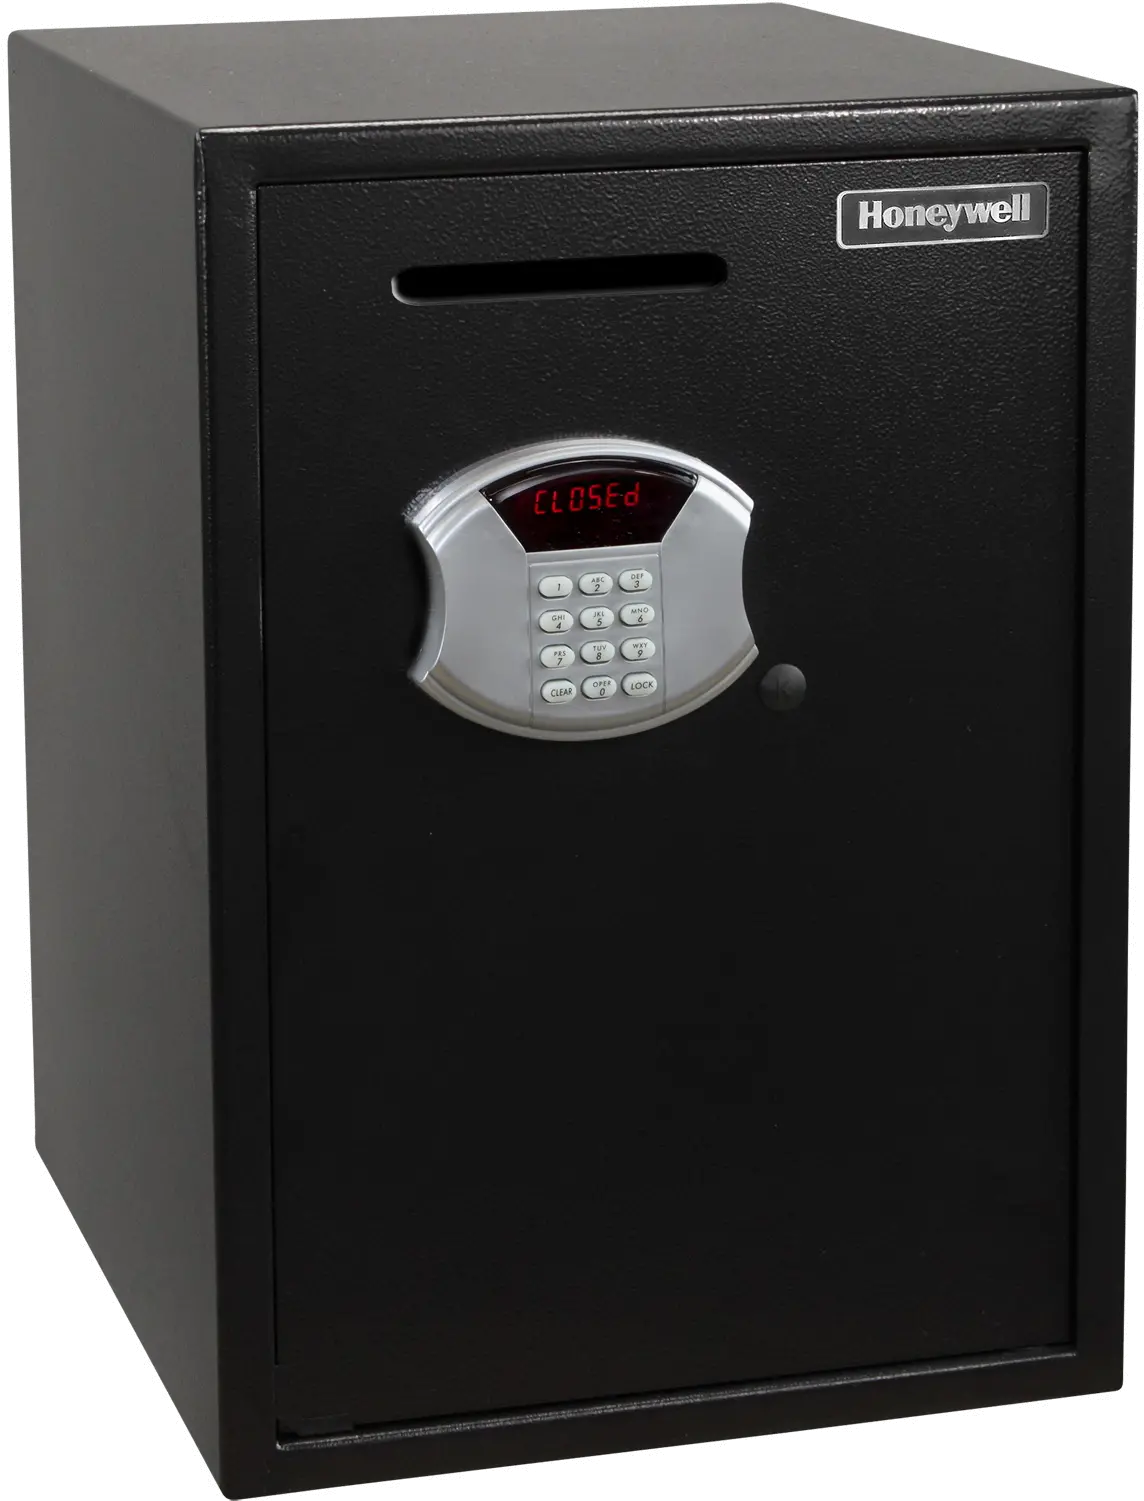 Honeywell 5107S Digital Security Safe with Depository Slot